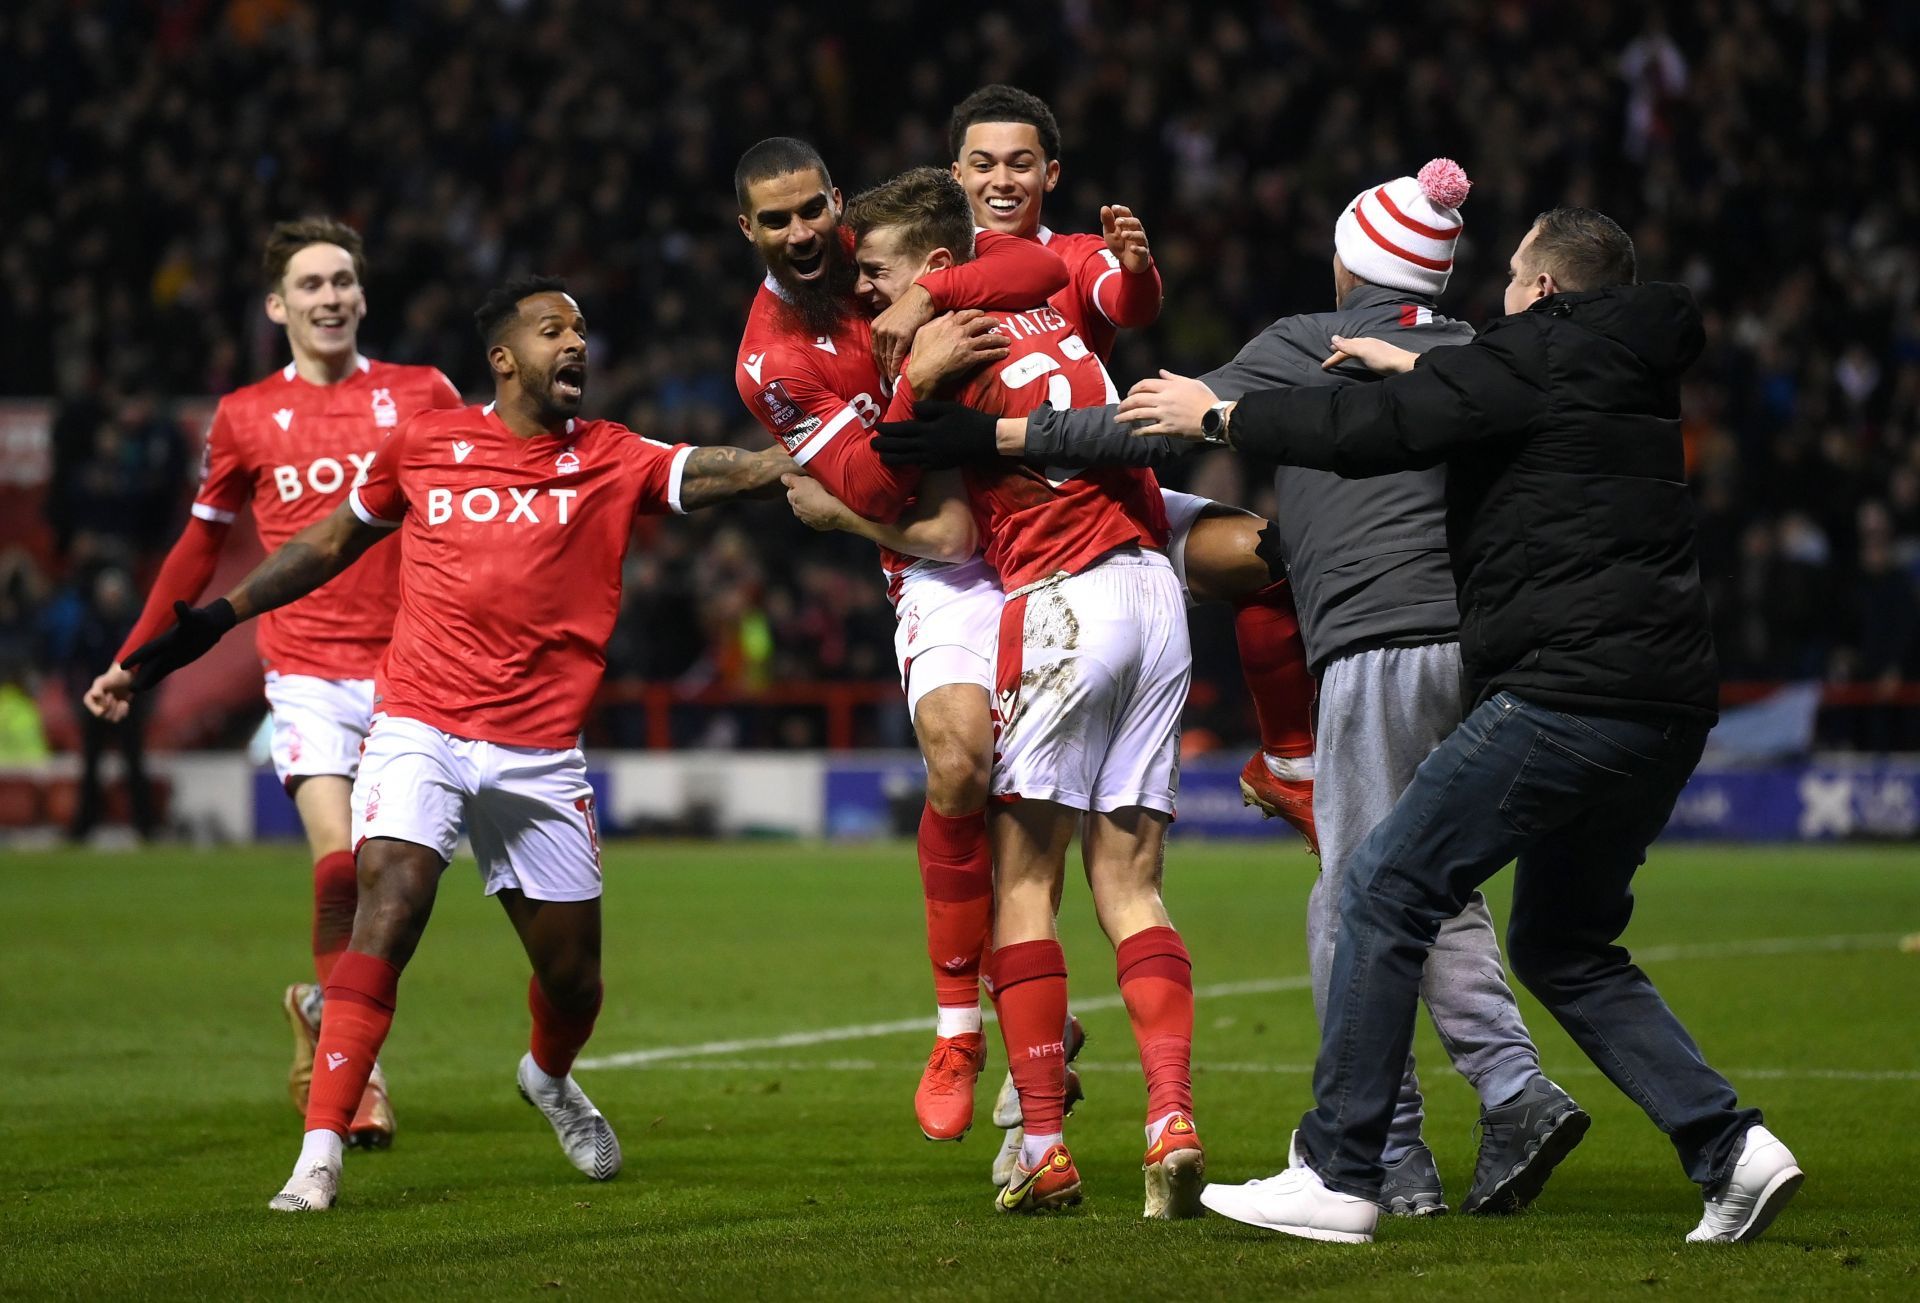 Nottingham Forest v Arsenal: The Emirates FA Cup Third Round